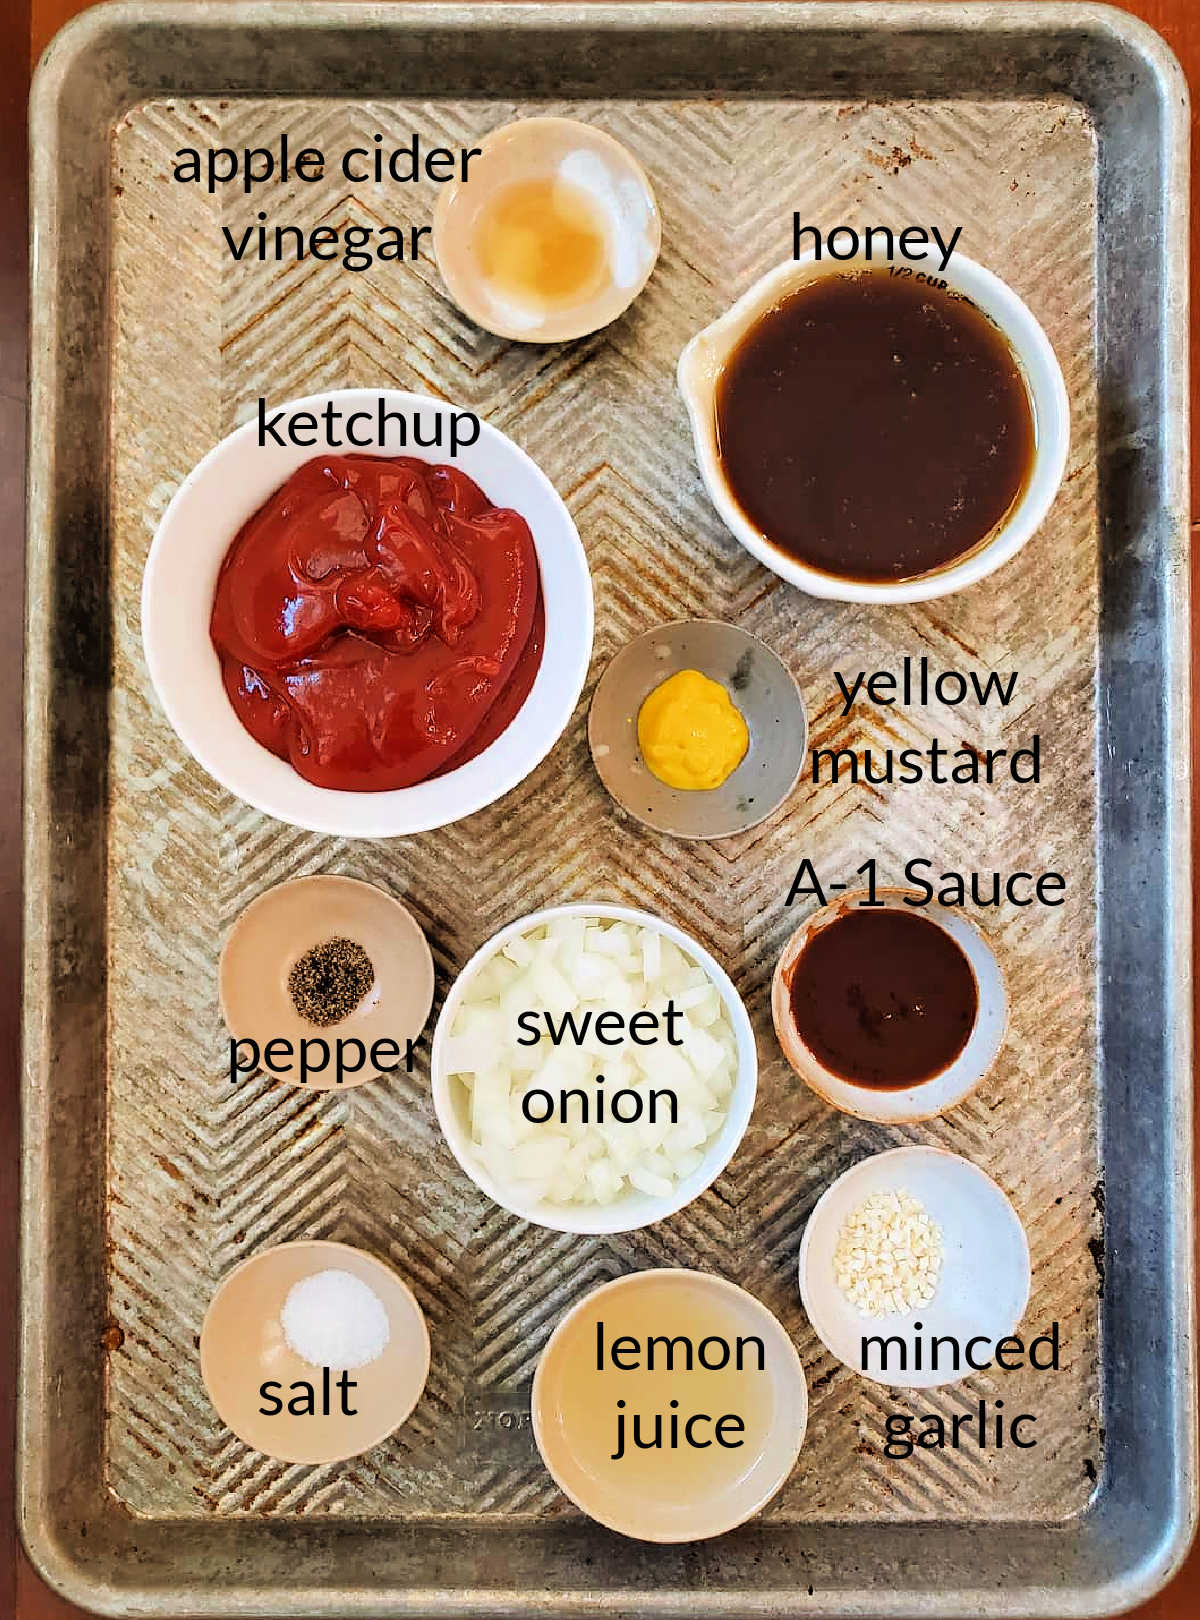 A collage of ingredients for making red sauce for cream cheese: vinegar, ketchup, honey, mustard, salt, pepper, onion, garlic, A1 sauce, and lemon juice.